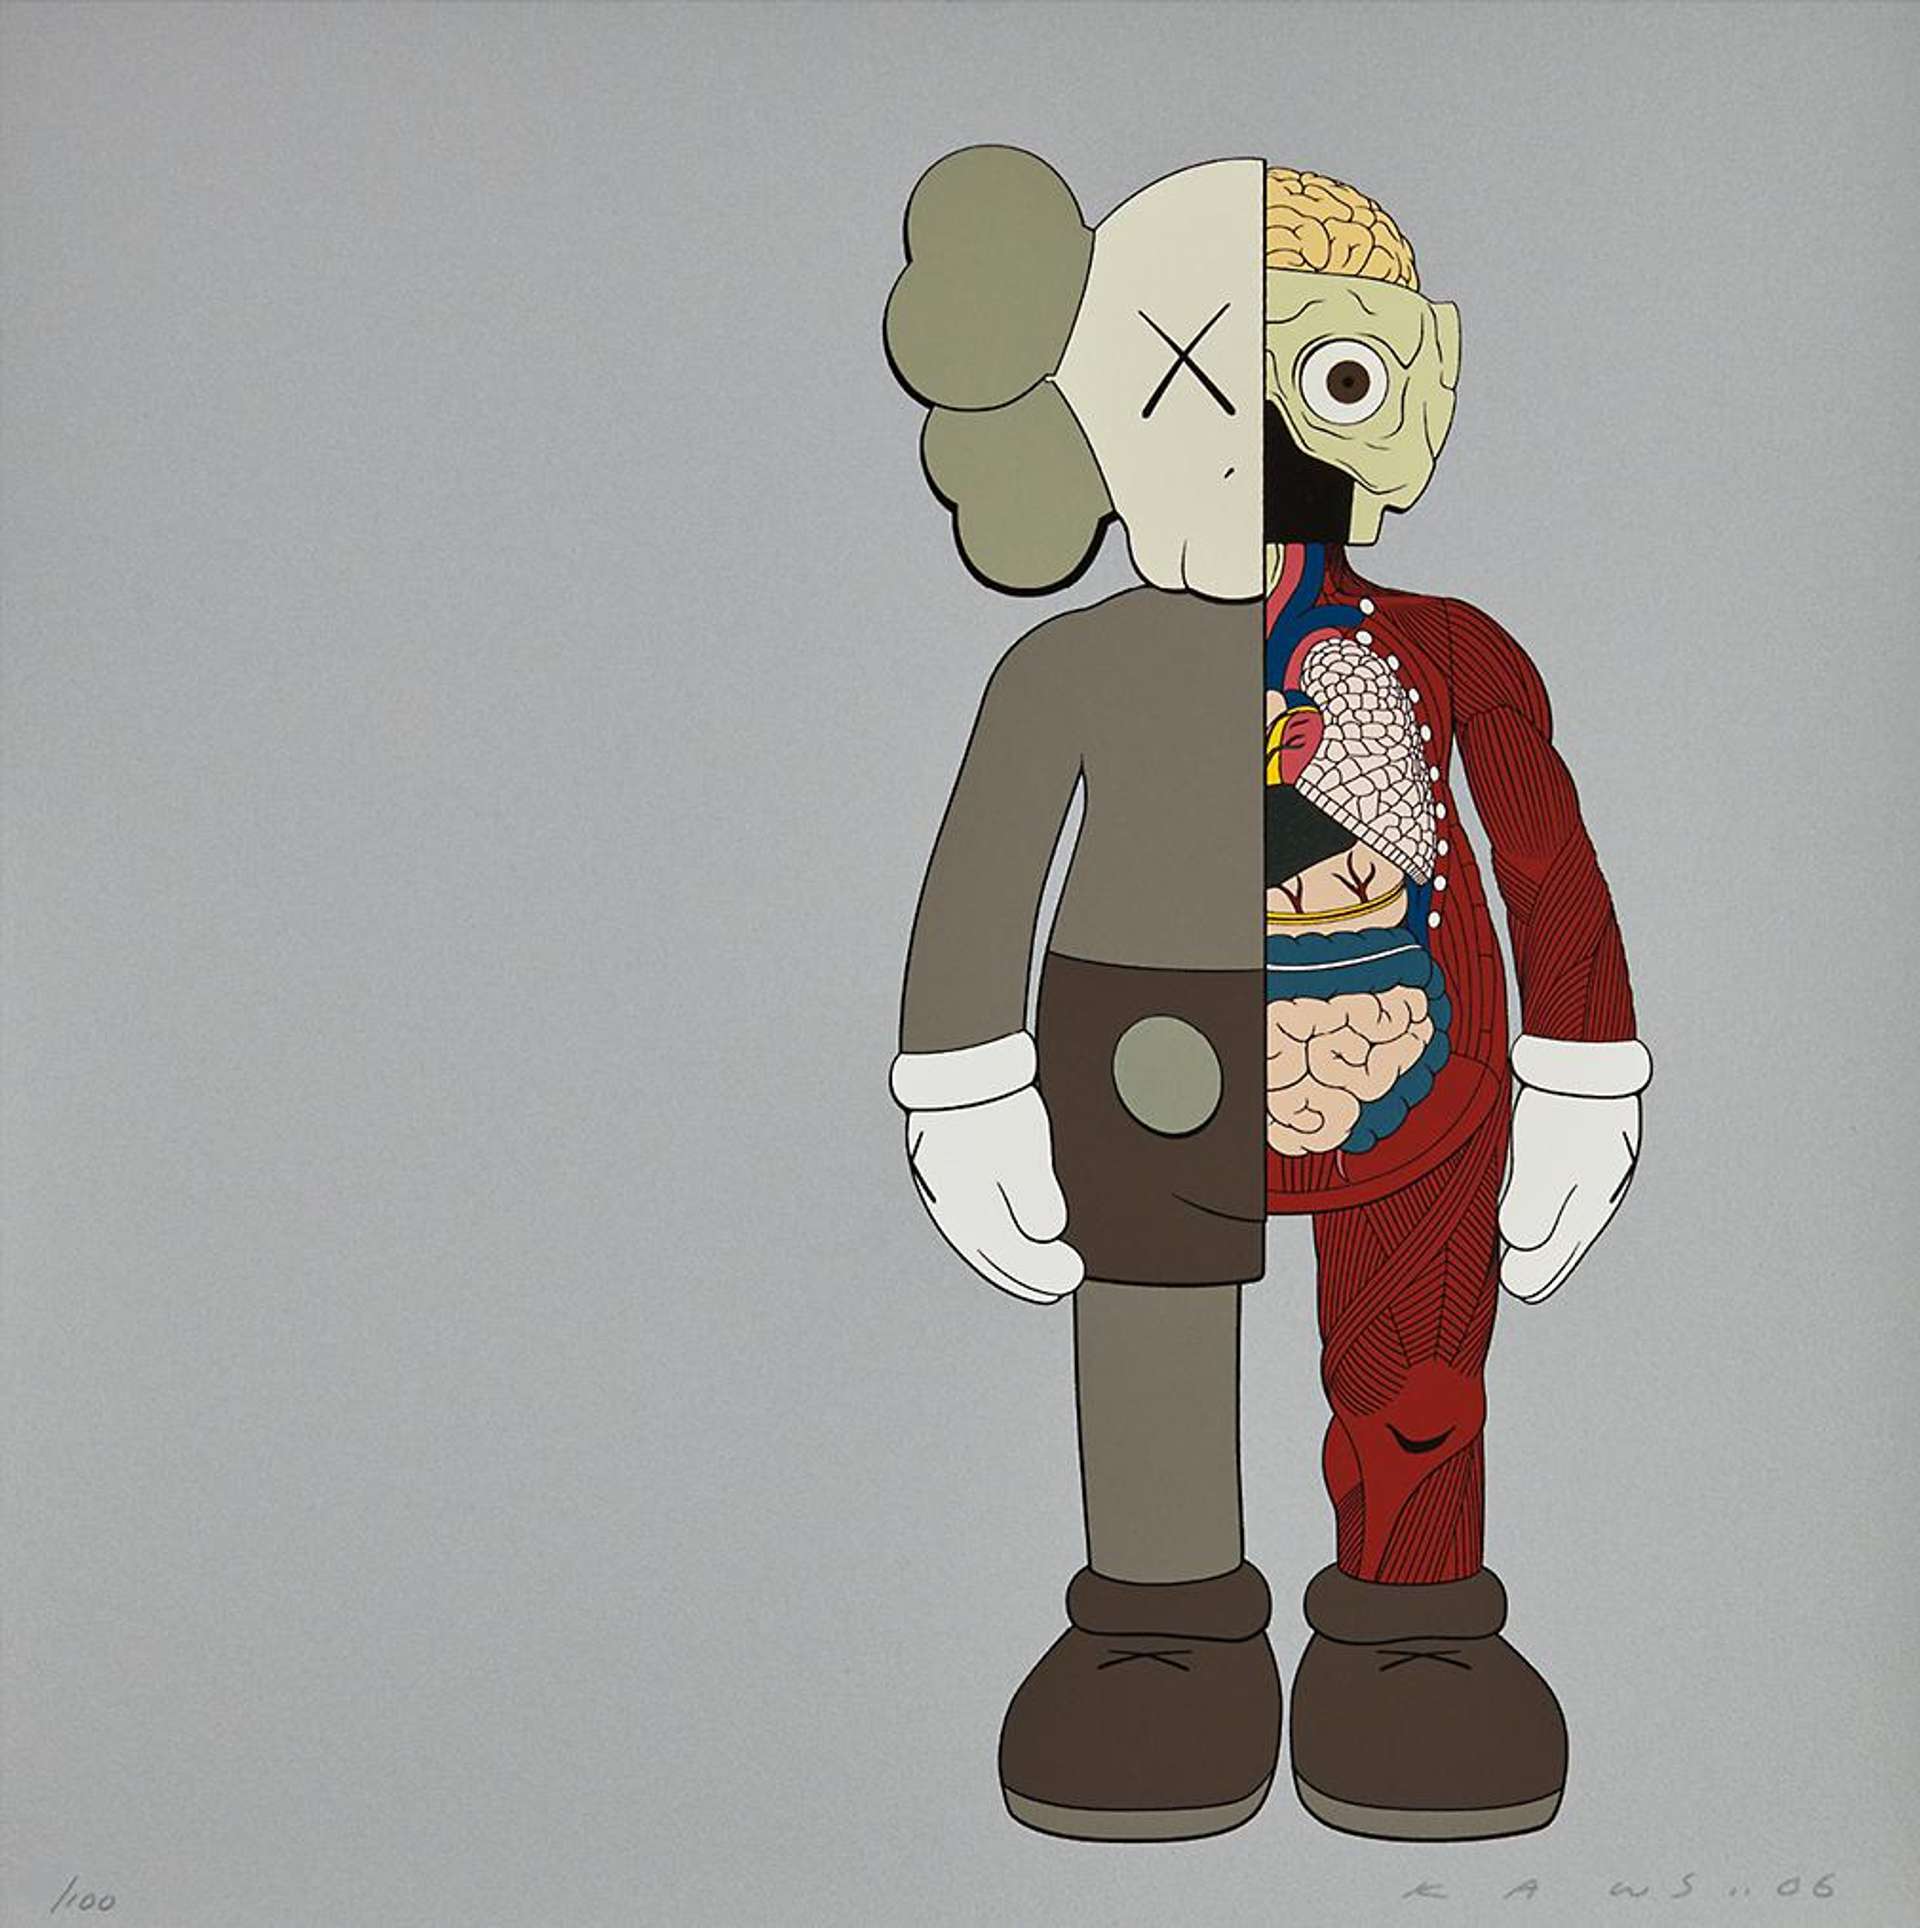 POSTER 8 WORKS by KAWS on artnet